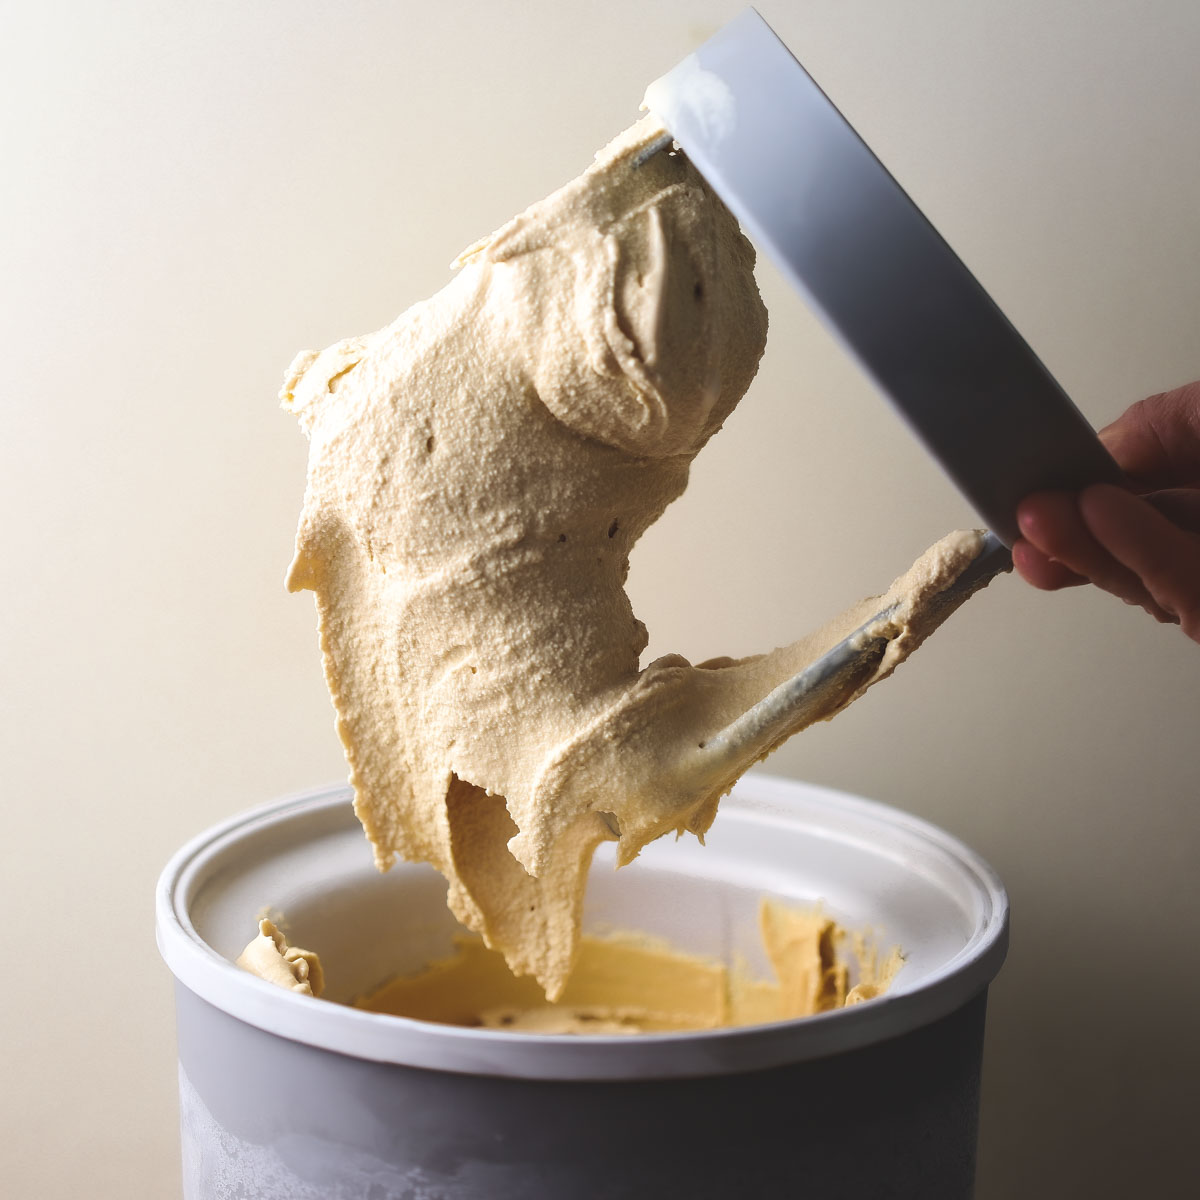 An ice cream maker paddle just pulled out of the ice maker bowl with Caramel ice cream still attached to it; a hand is holding the paddle.